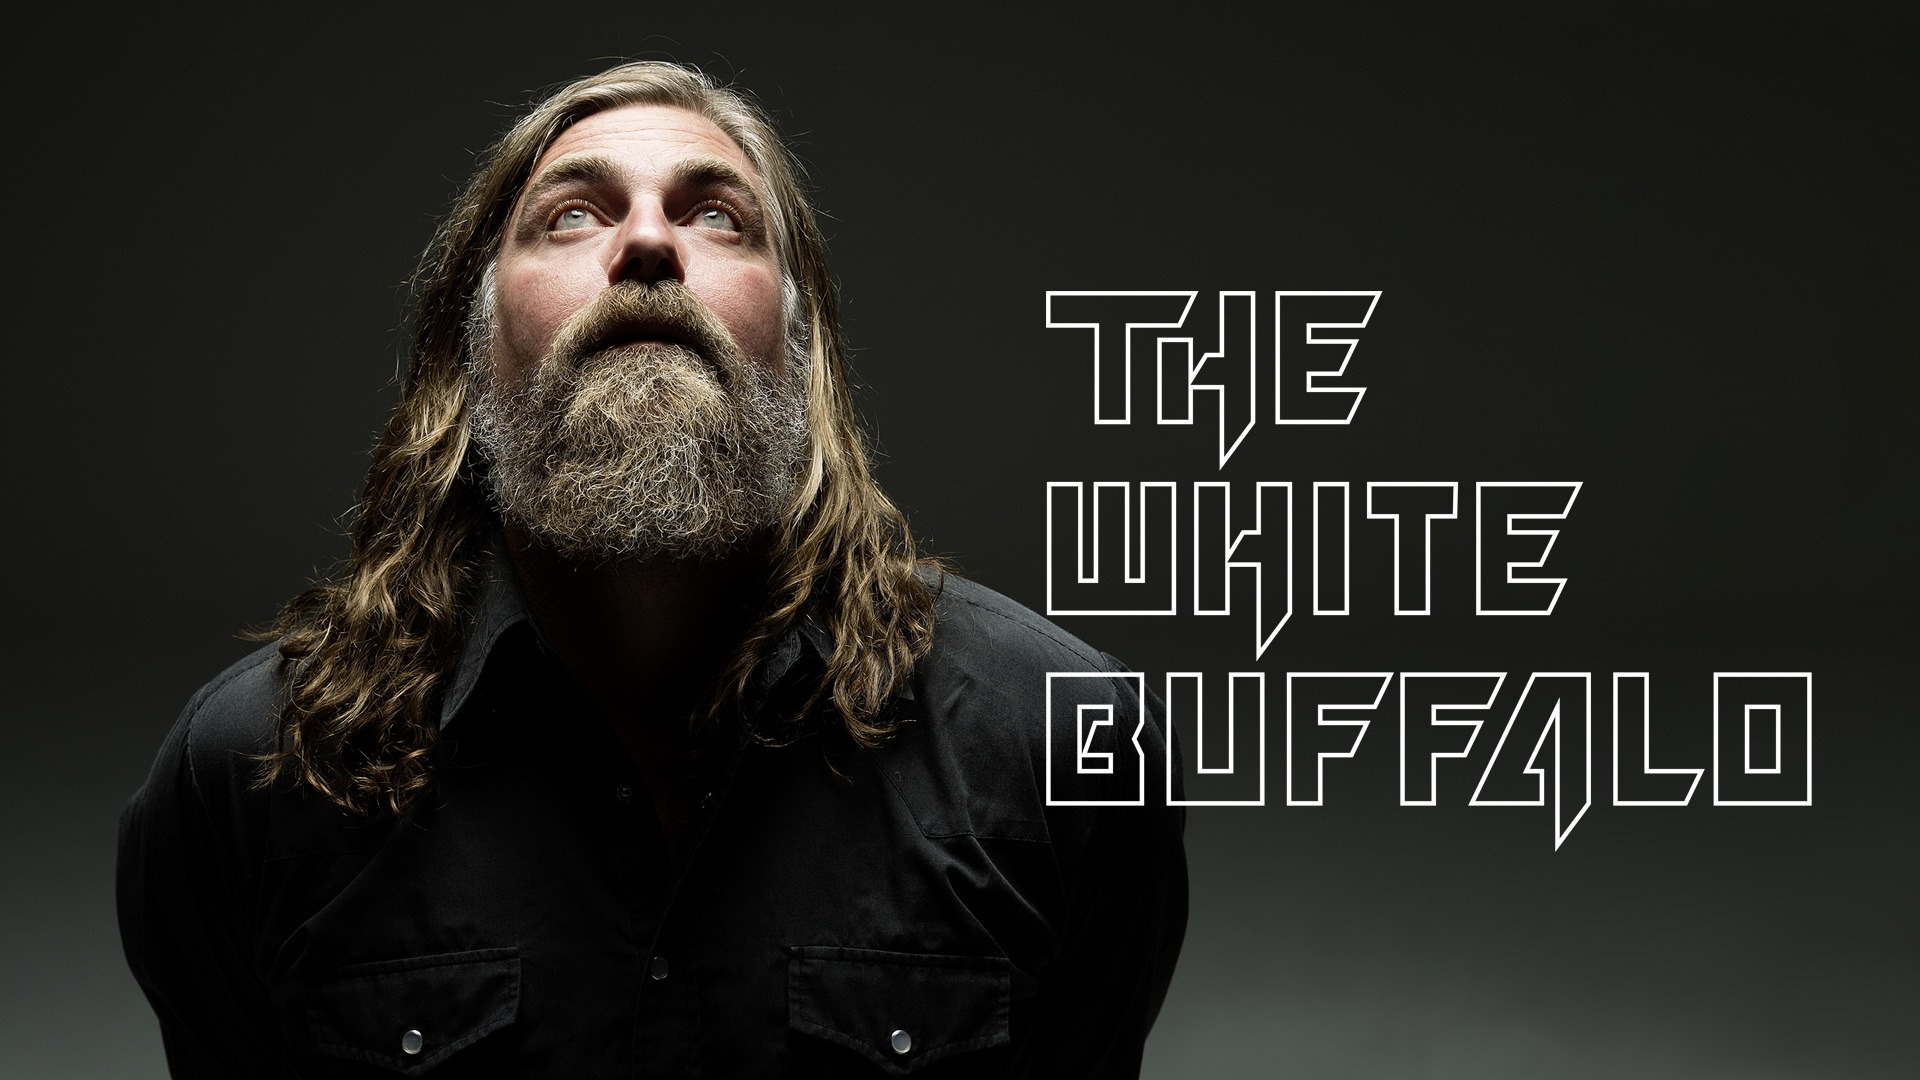 The White Buffalo Live - Coming Soon in UAE